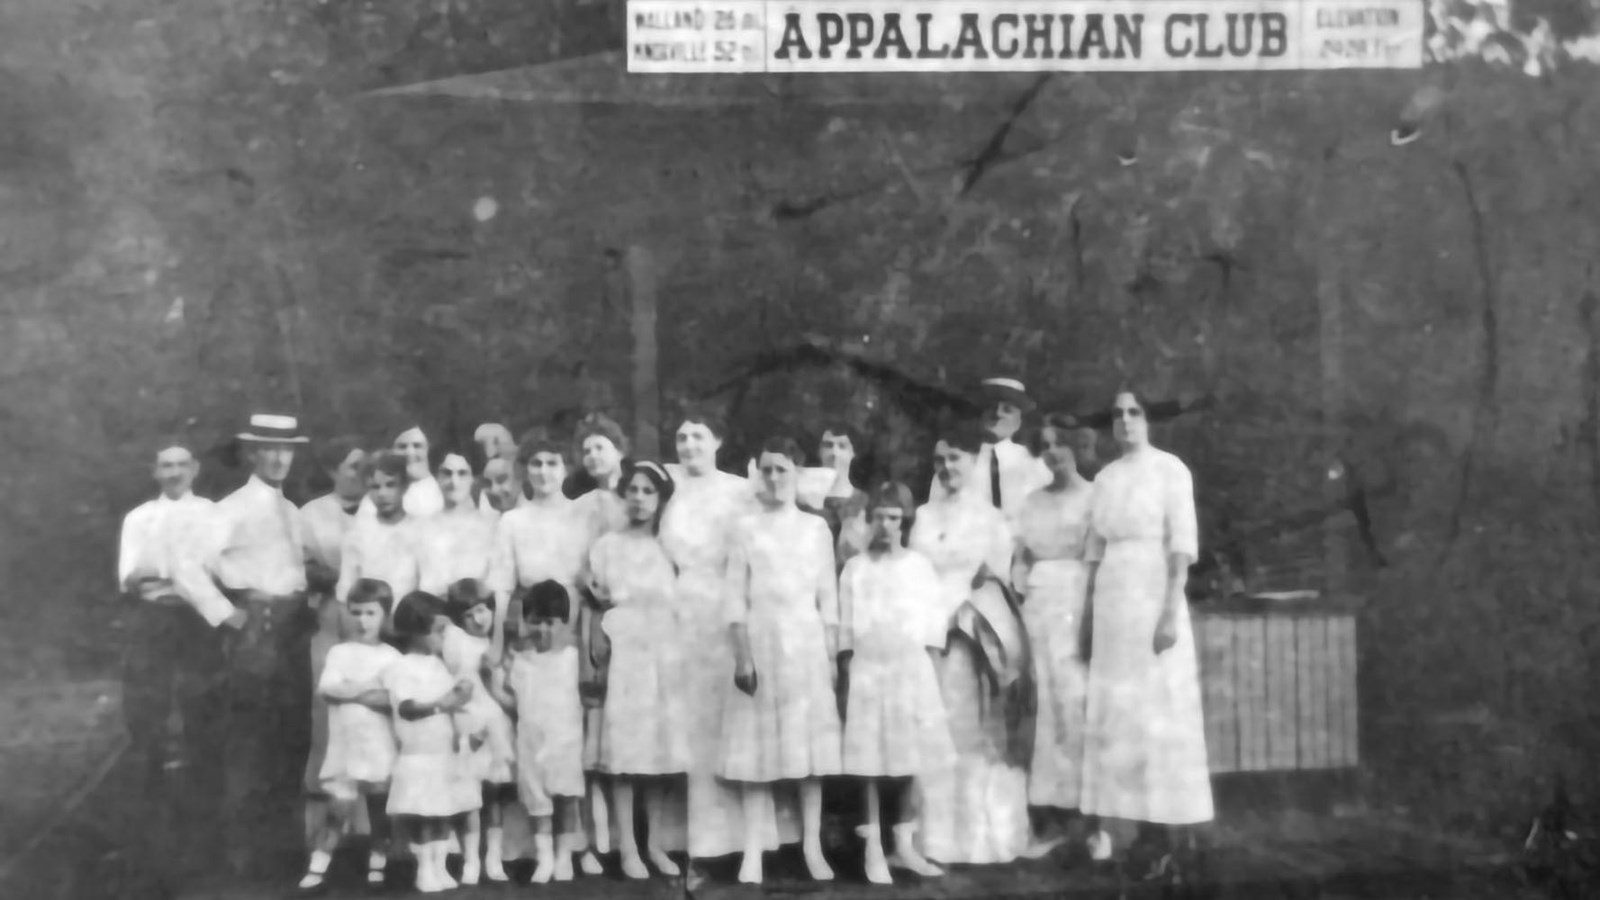 Black and white image of residents standing at the Appalachian Club Depot